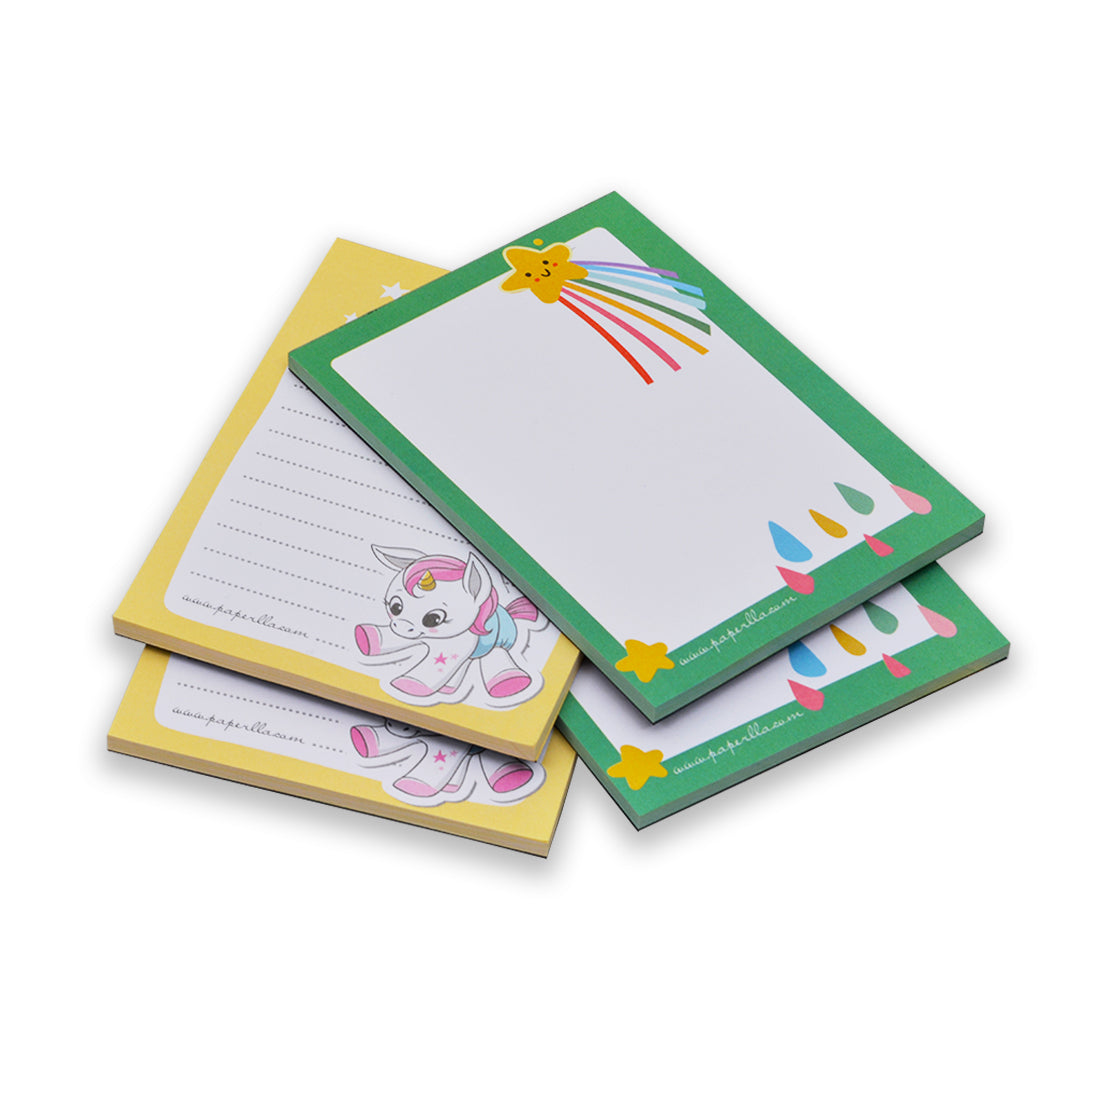 TO DO LIST DIARY, CUTE STATIONERY ITEMS MONTHLY PLANNER JOURNAL WRITING PADS GIFTS FOR TEACHERS BY STUDENTS, SET OF 4